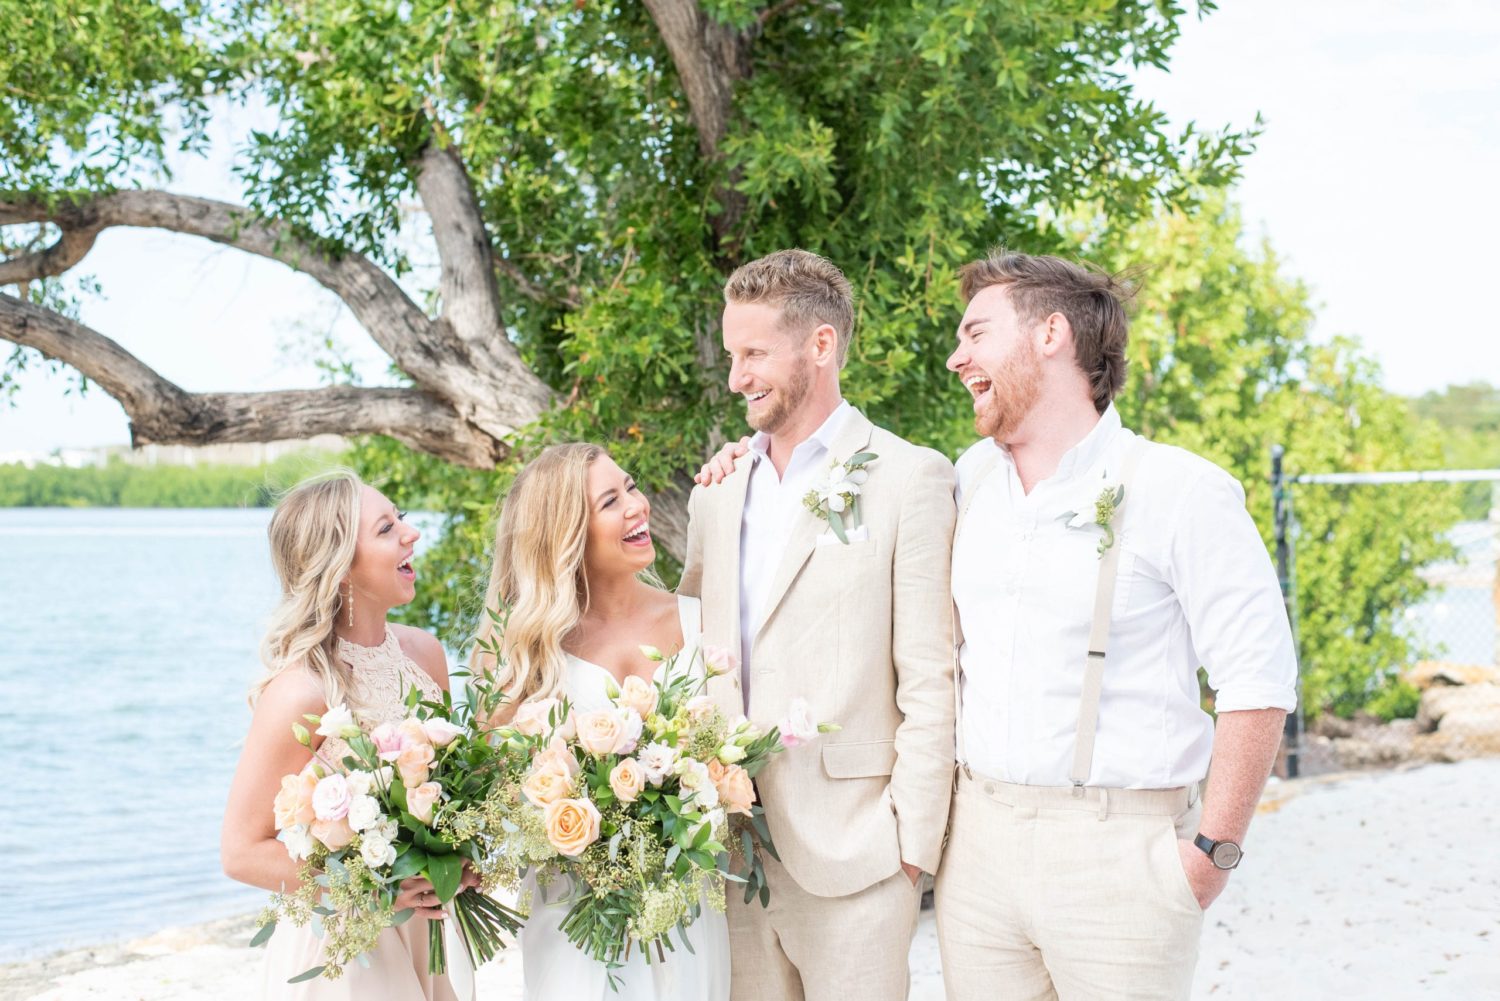 Key west wedding in Florida at Marriott beachside hotel during Spring bridal party photo with bride, groom, bridesmaid and groomsmen